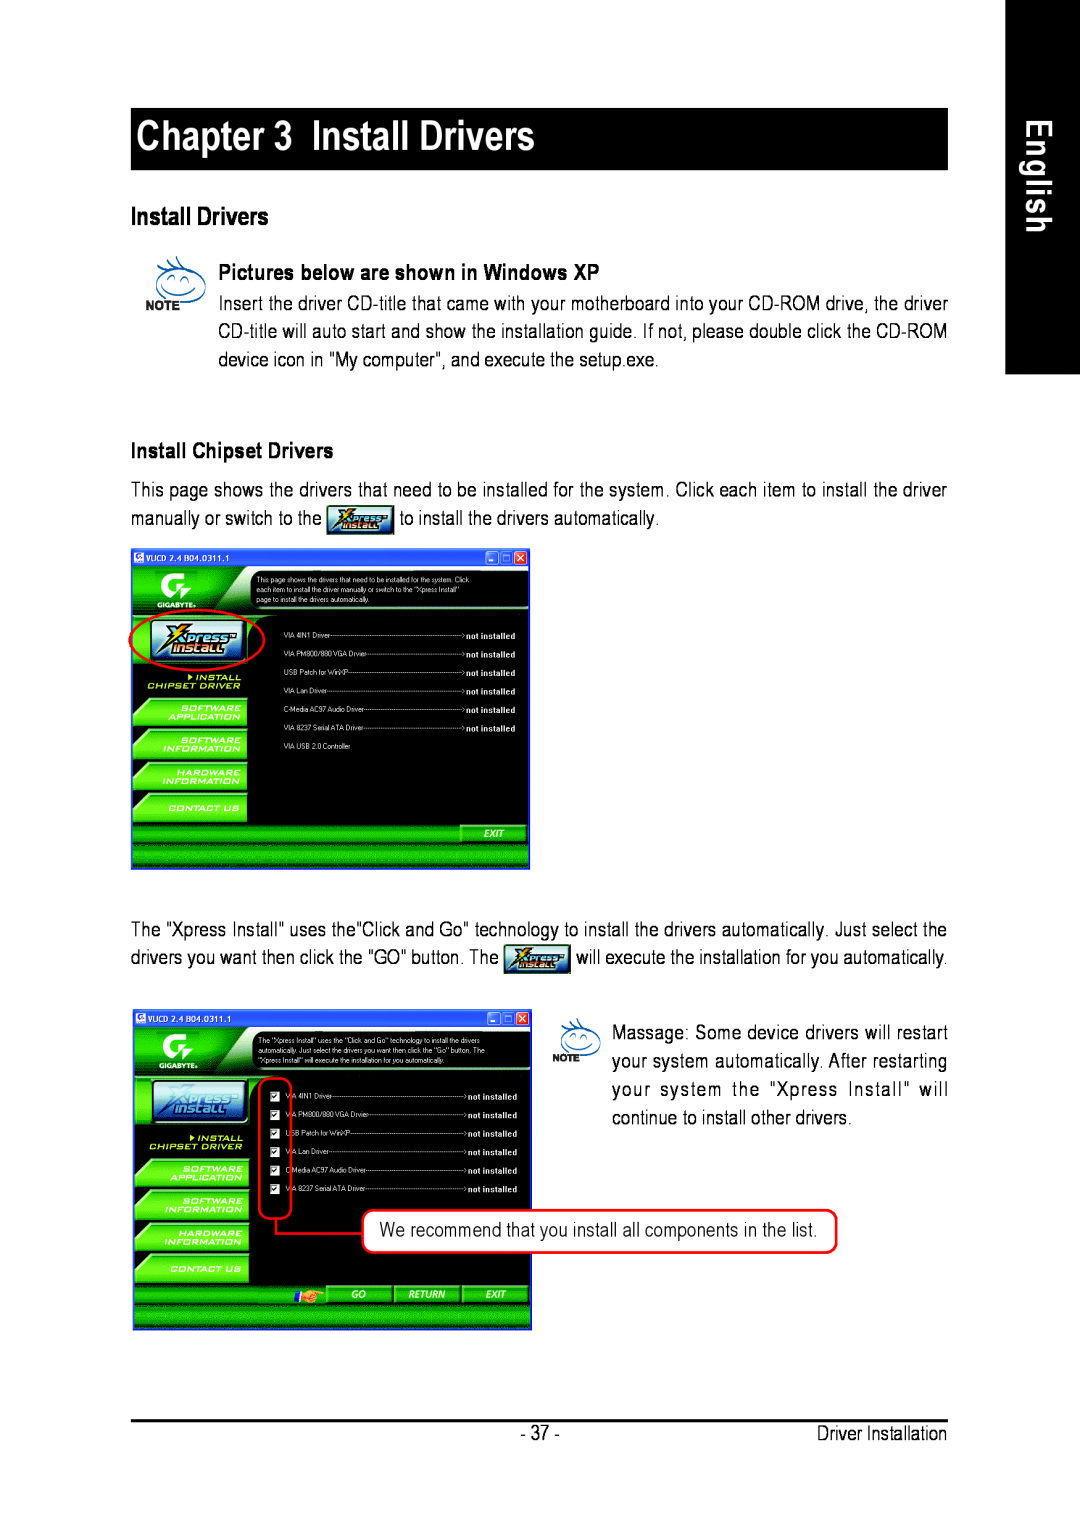 Intel 8VM800M-RZ user manual Install Drivers, English, Pictures below are shown in Windows XP, Install Chipset Drivers 